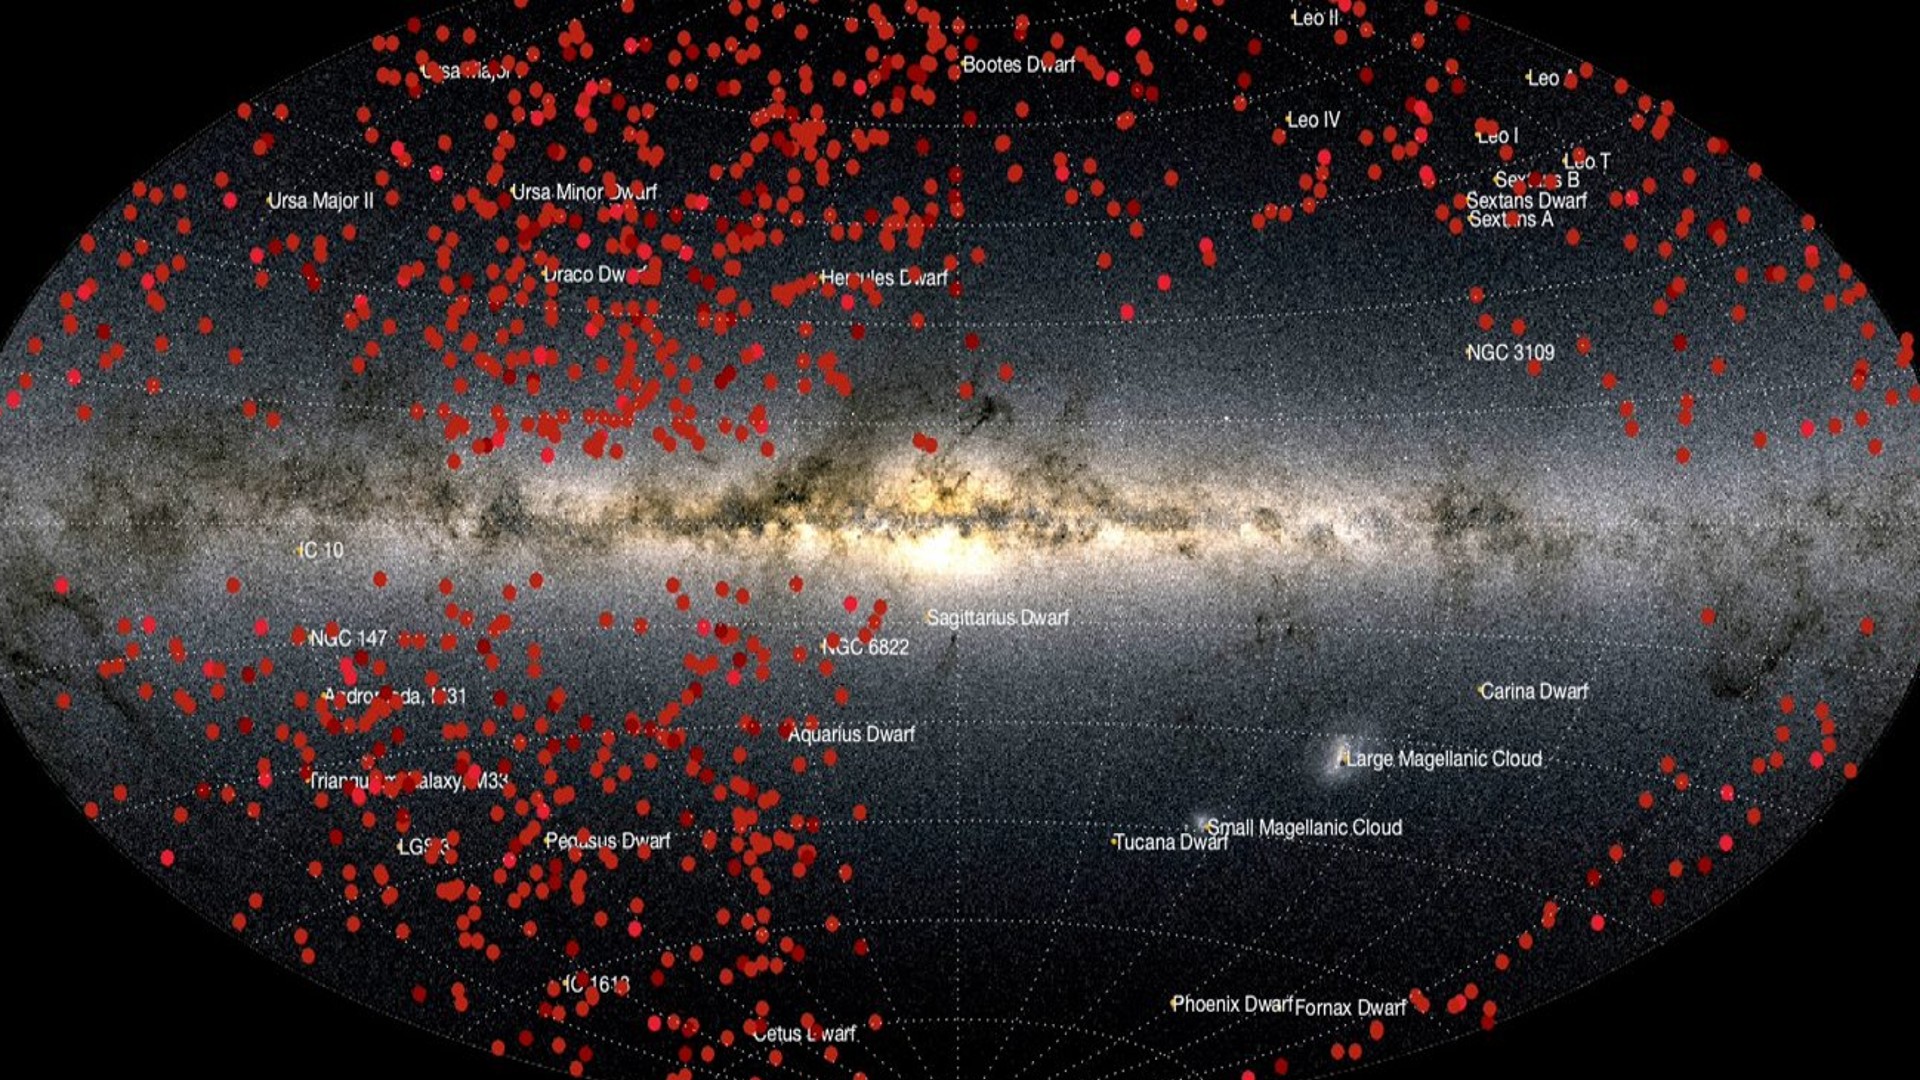 Supernova algorithm classifies 1,000 dying stars without error